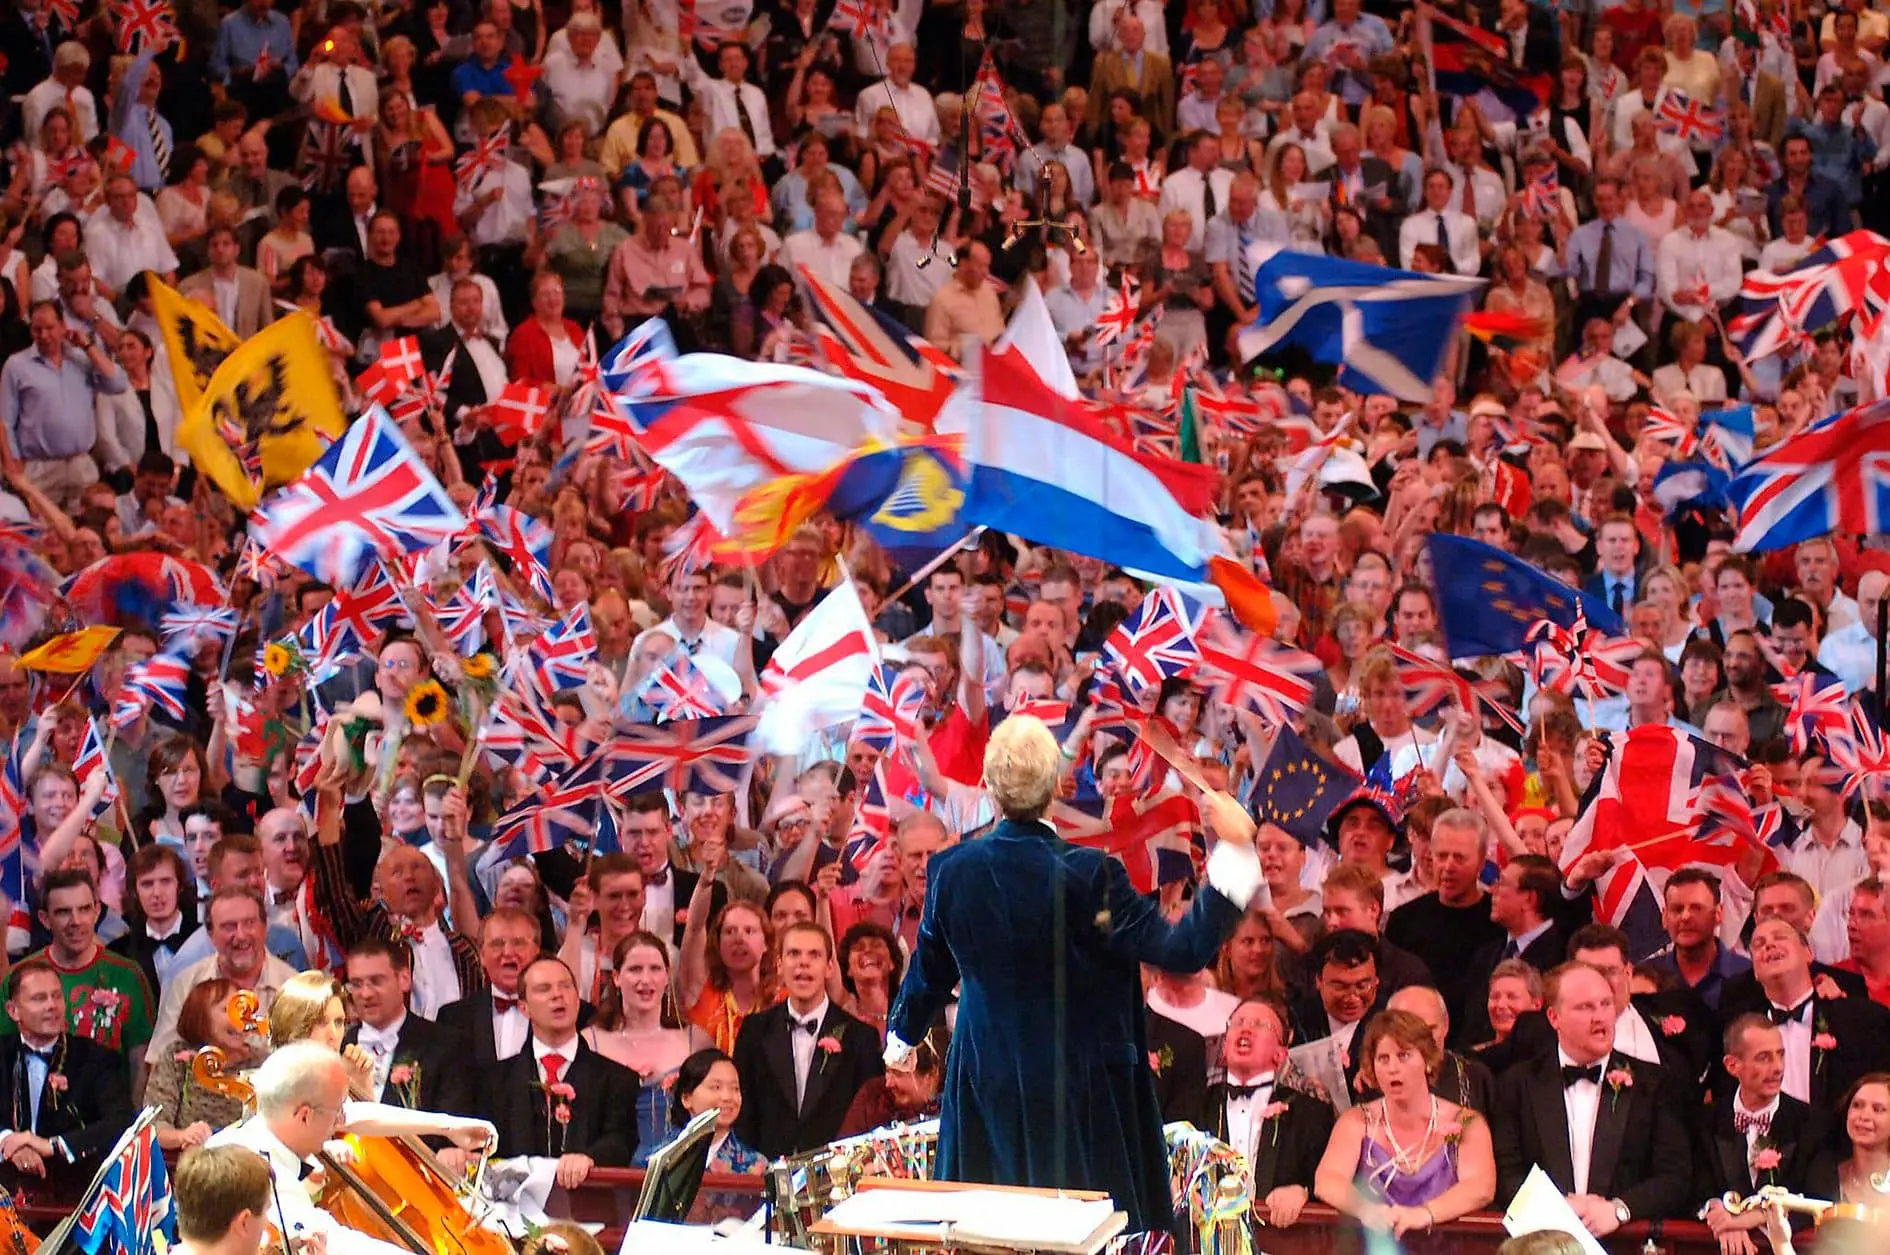 Image of conductor facing audience who are singing along to the orchestra at the proms